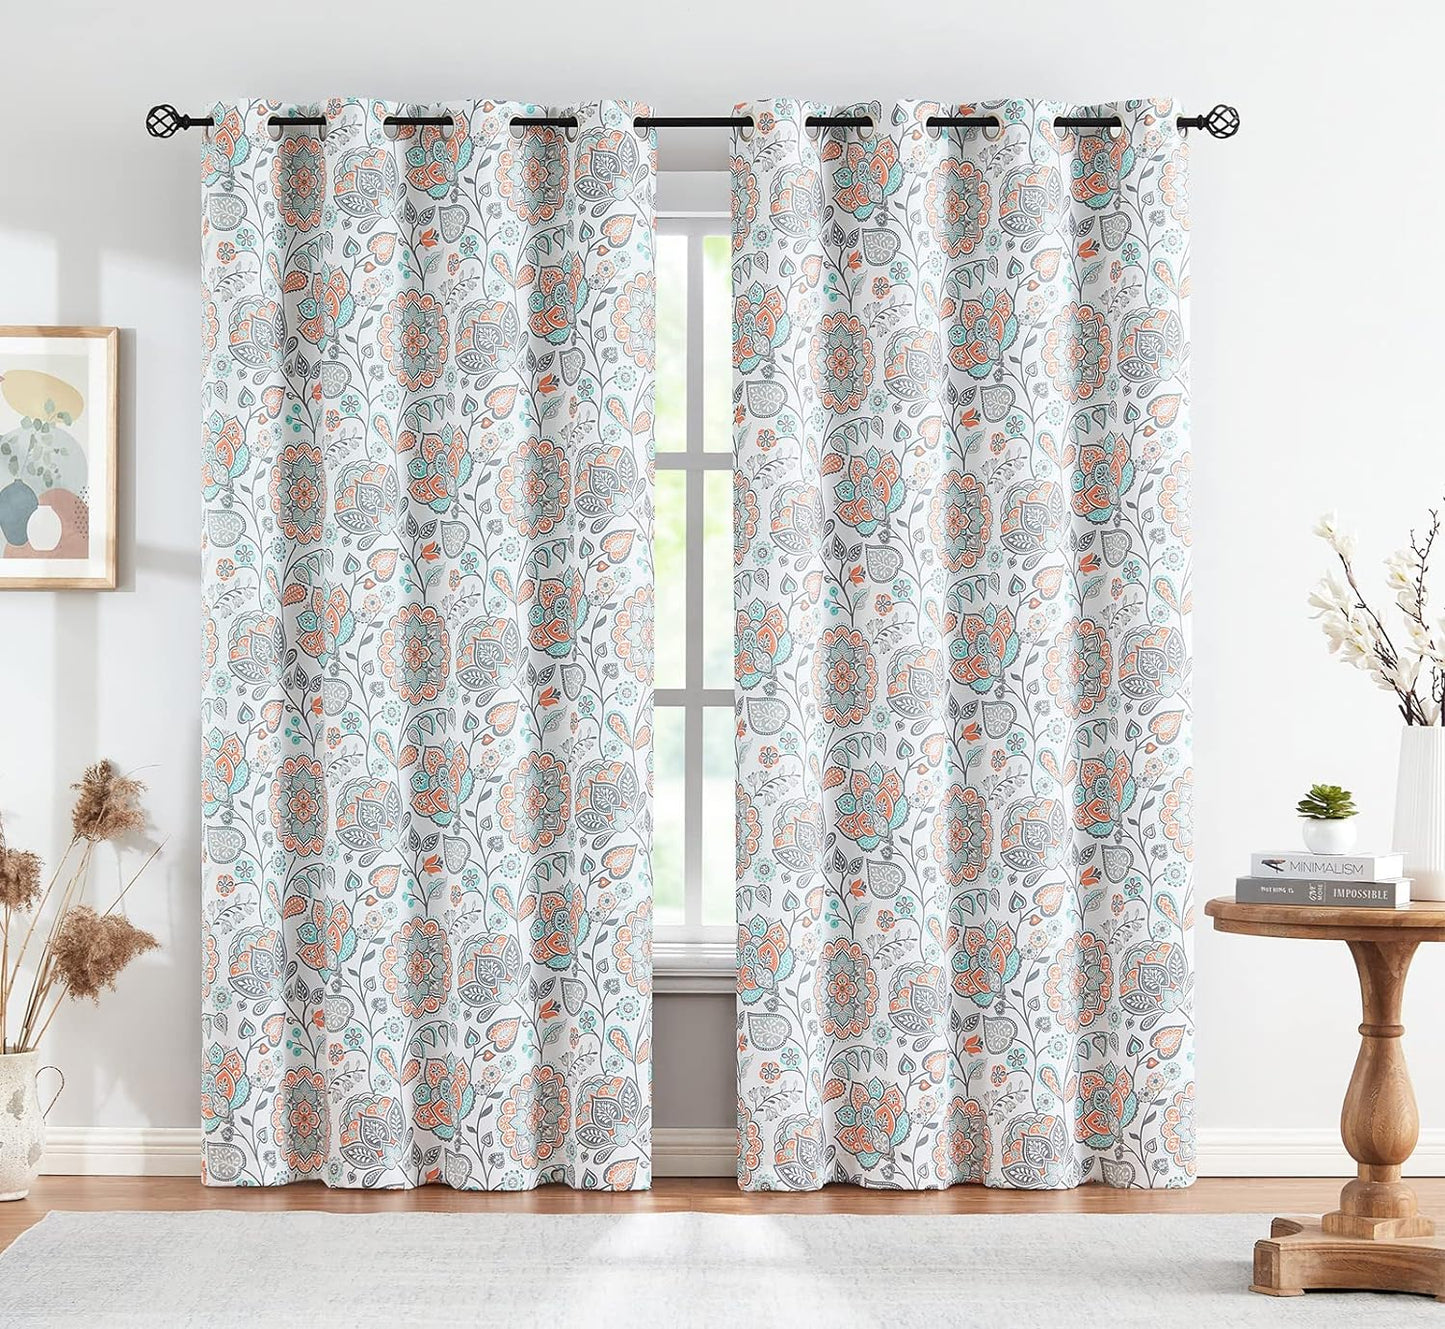 White Grey Blackout Curtains for Bedroom 84 Inch Length Floral Printed Living Room Curtain Panels for Farmhouse Décor Blossom Thermal Energy Efficient Light Blocking Window Curtain 50"W 2Pcs  Fmfunctex Jacobean/ Orange 50"W X 84"L 2Pcs 